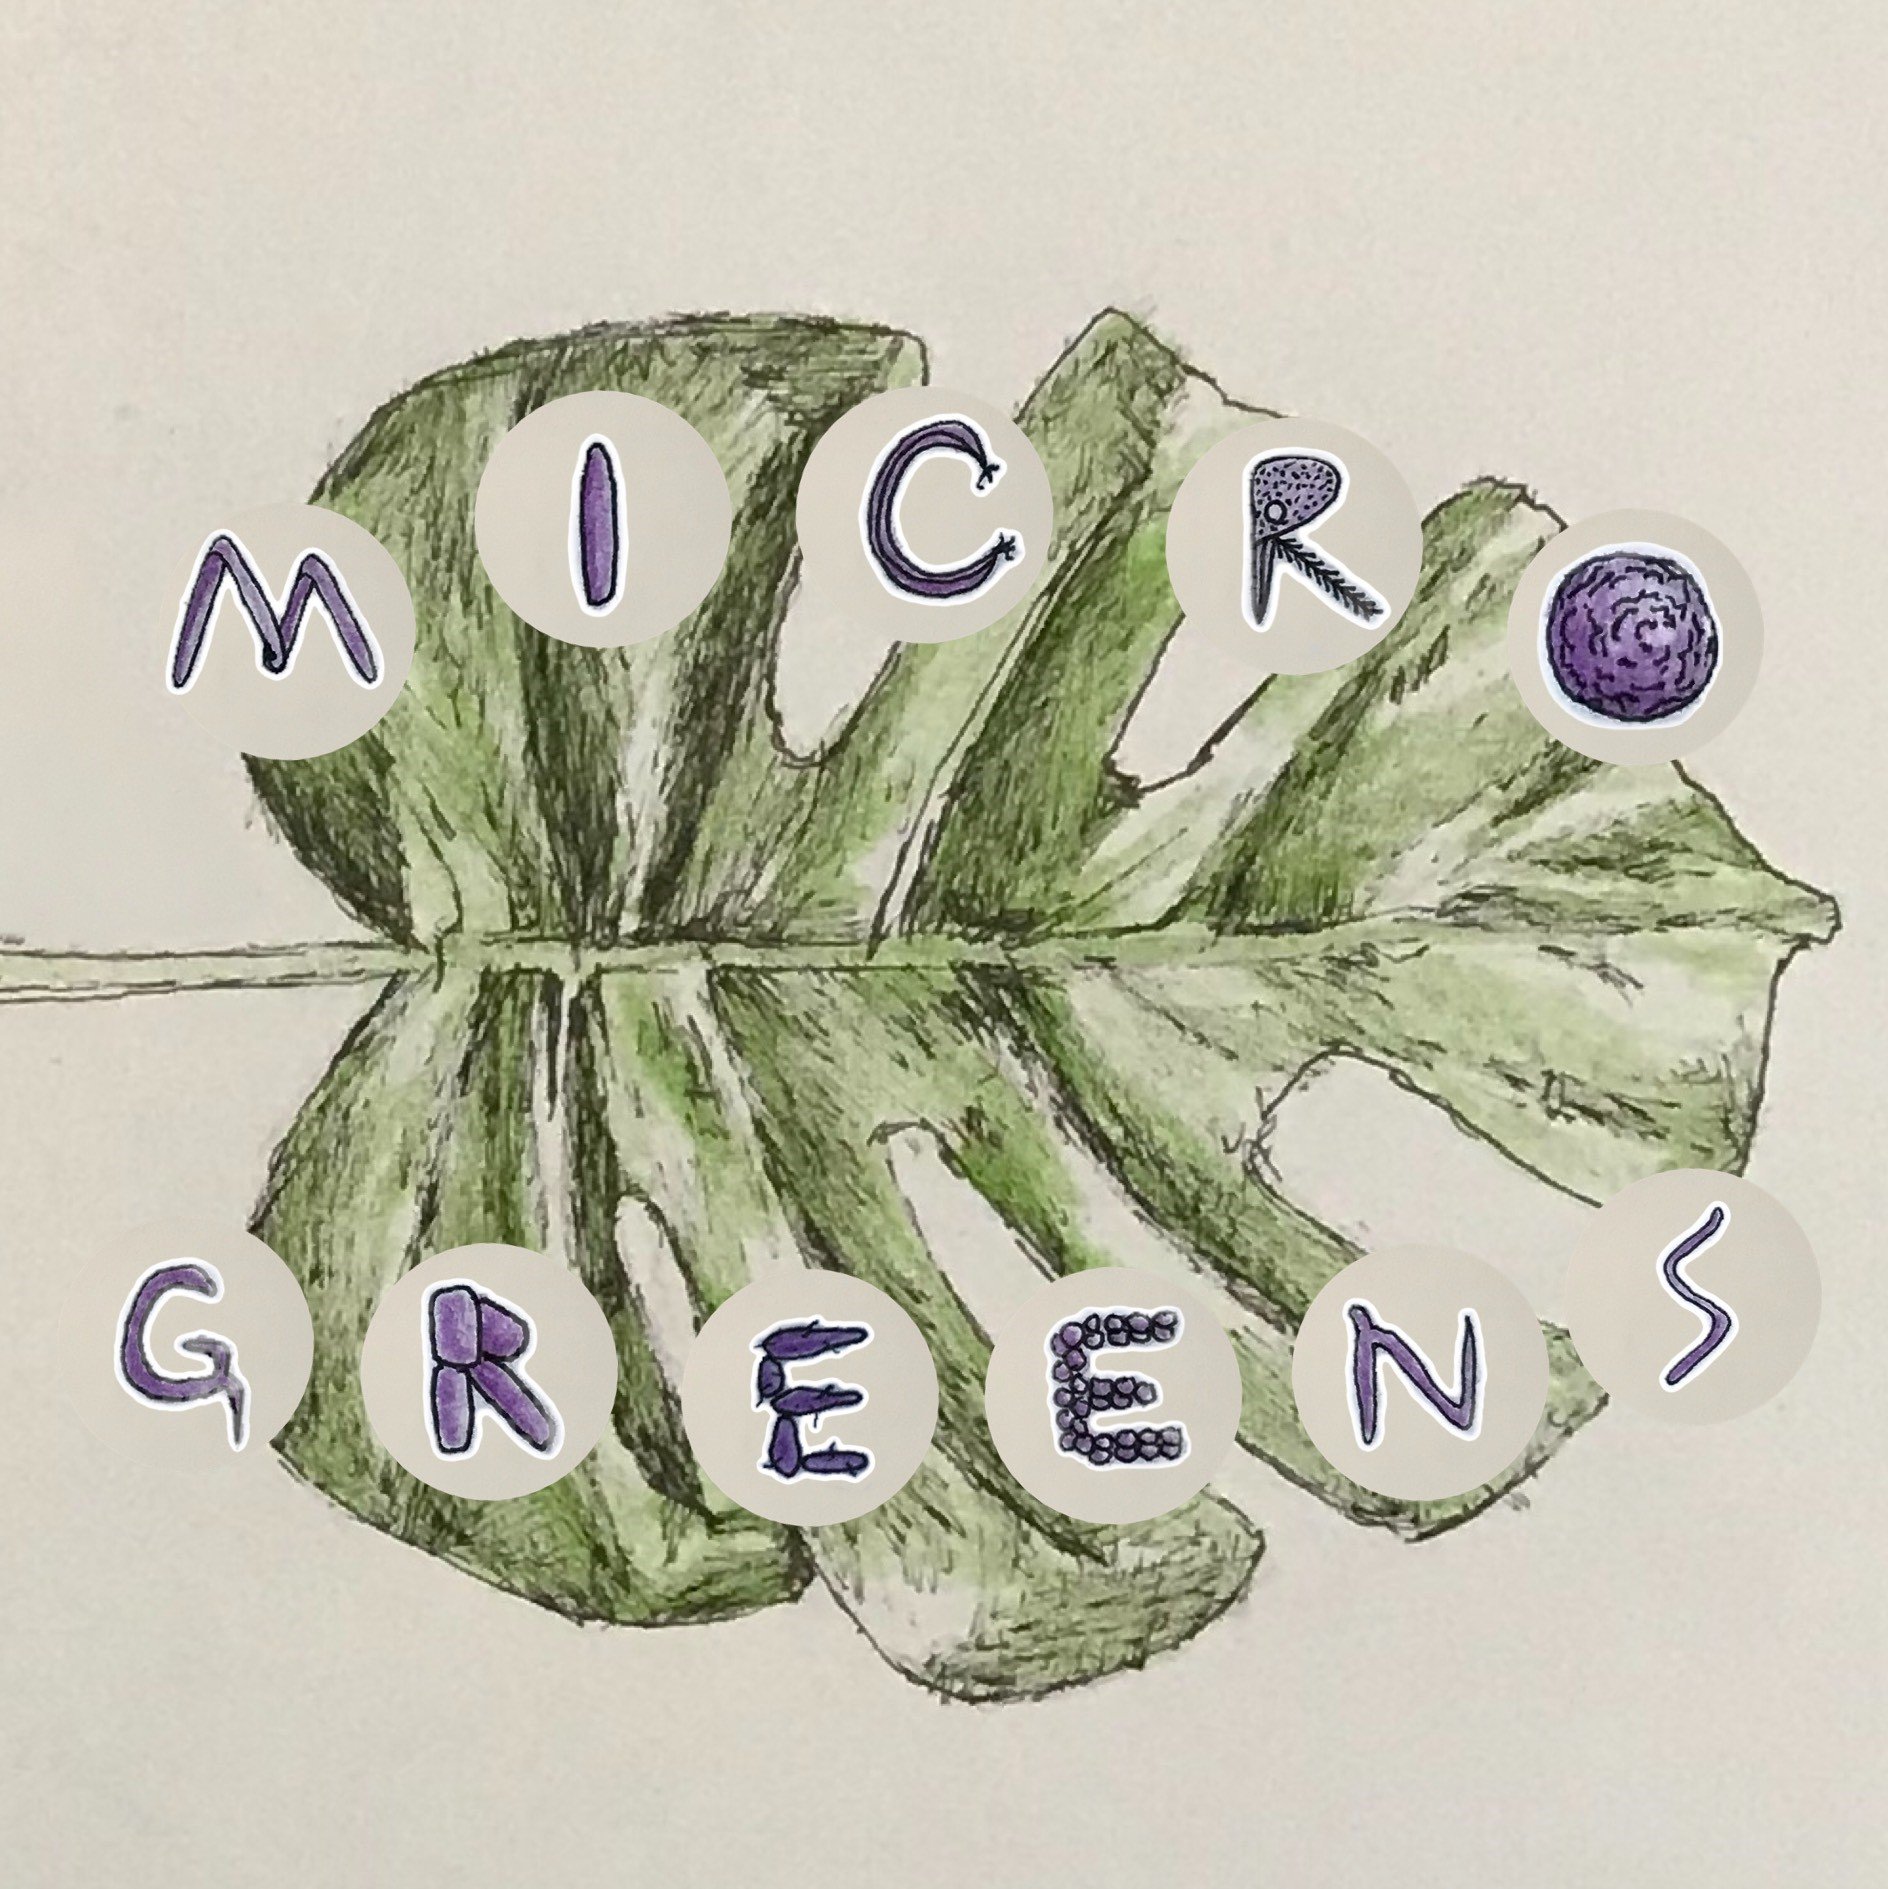 Twitter Account of the MPMI Podcast (MPMI = The Molecular Plant-Microbe Interactions Journal)